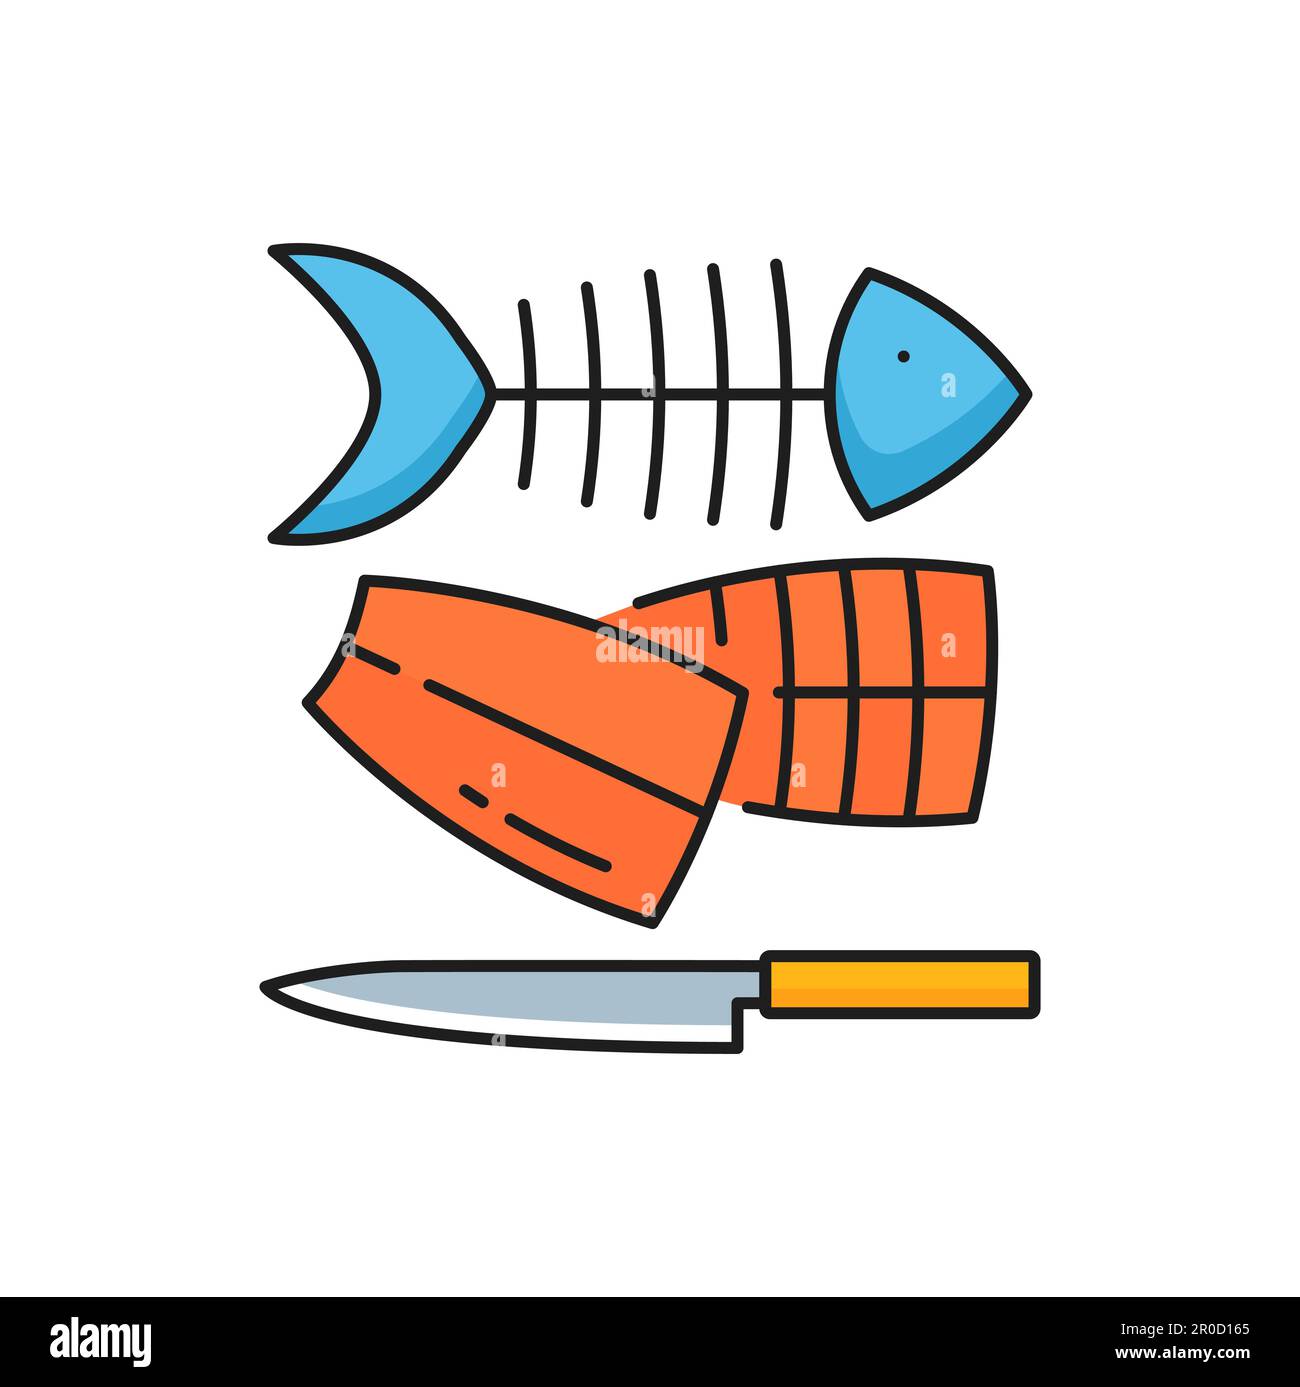 https://c8.alamy.com/comp/2R0D165/fishing-industry-fish-fillet-processing-line-icon-salmon-trout-or-tuna-meat-cutting-seafood-product-manufacture-fishing-industry-thin-line-vector-2R0D165.jpg